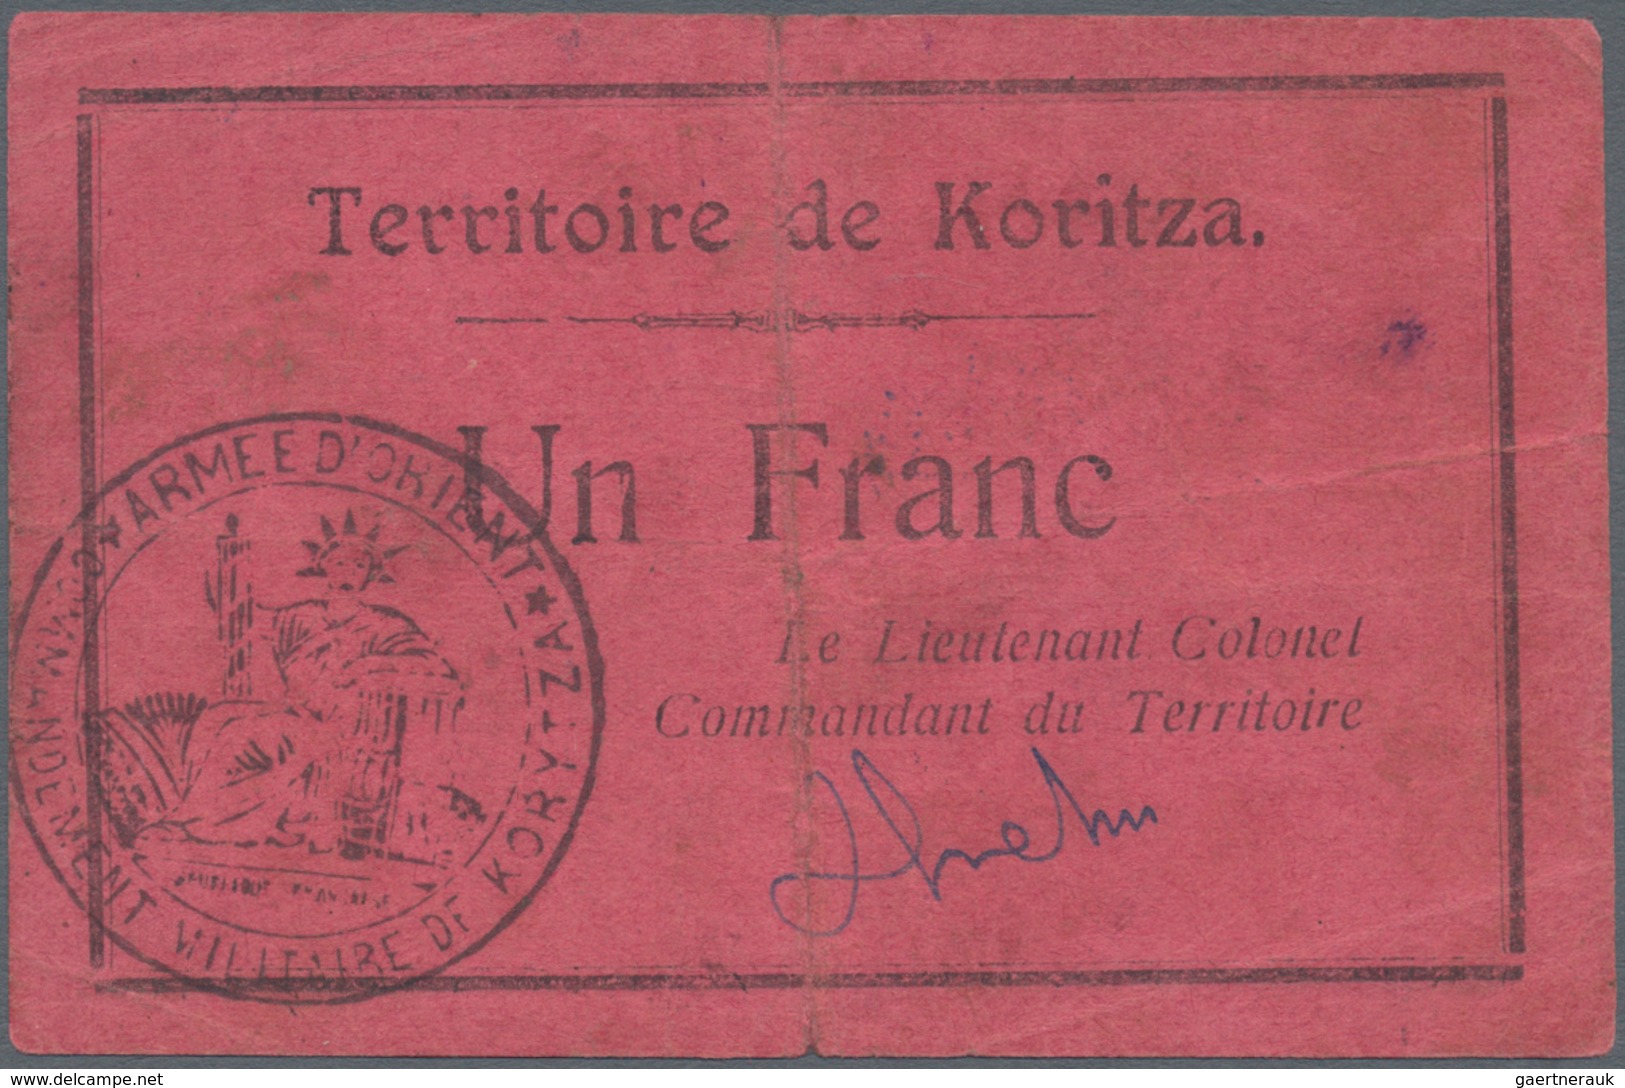 Albania / Albanien: 1 Frange 1920 P. S154, Used With Folds And Creases, Stronger Center Fold Causing - Albanie